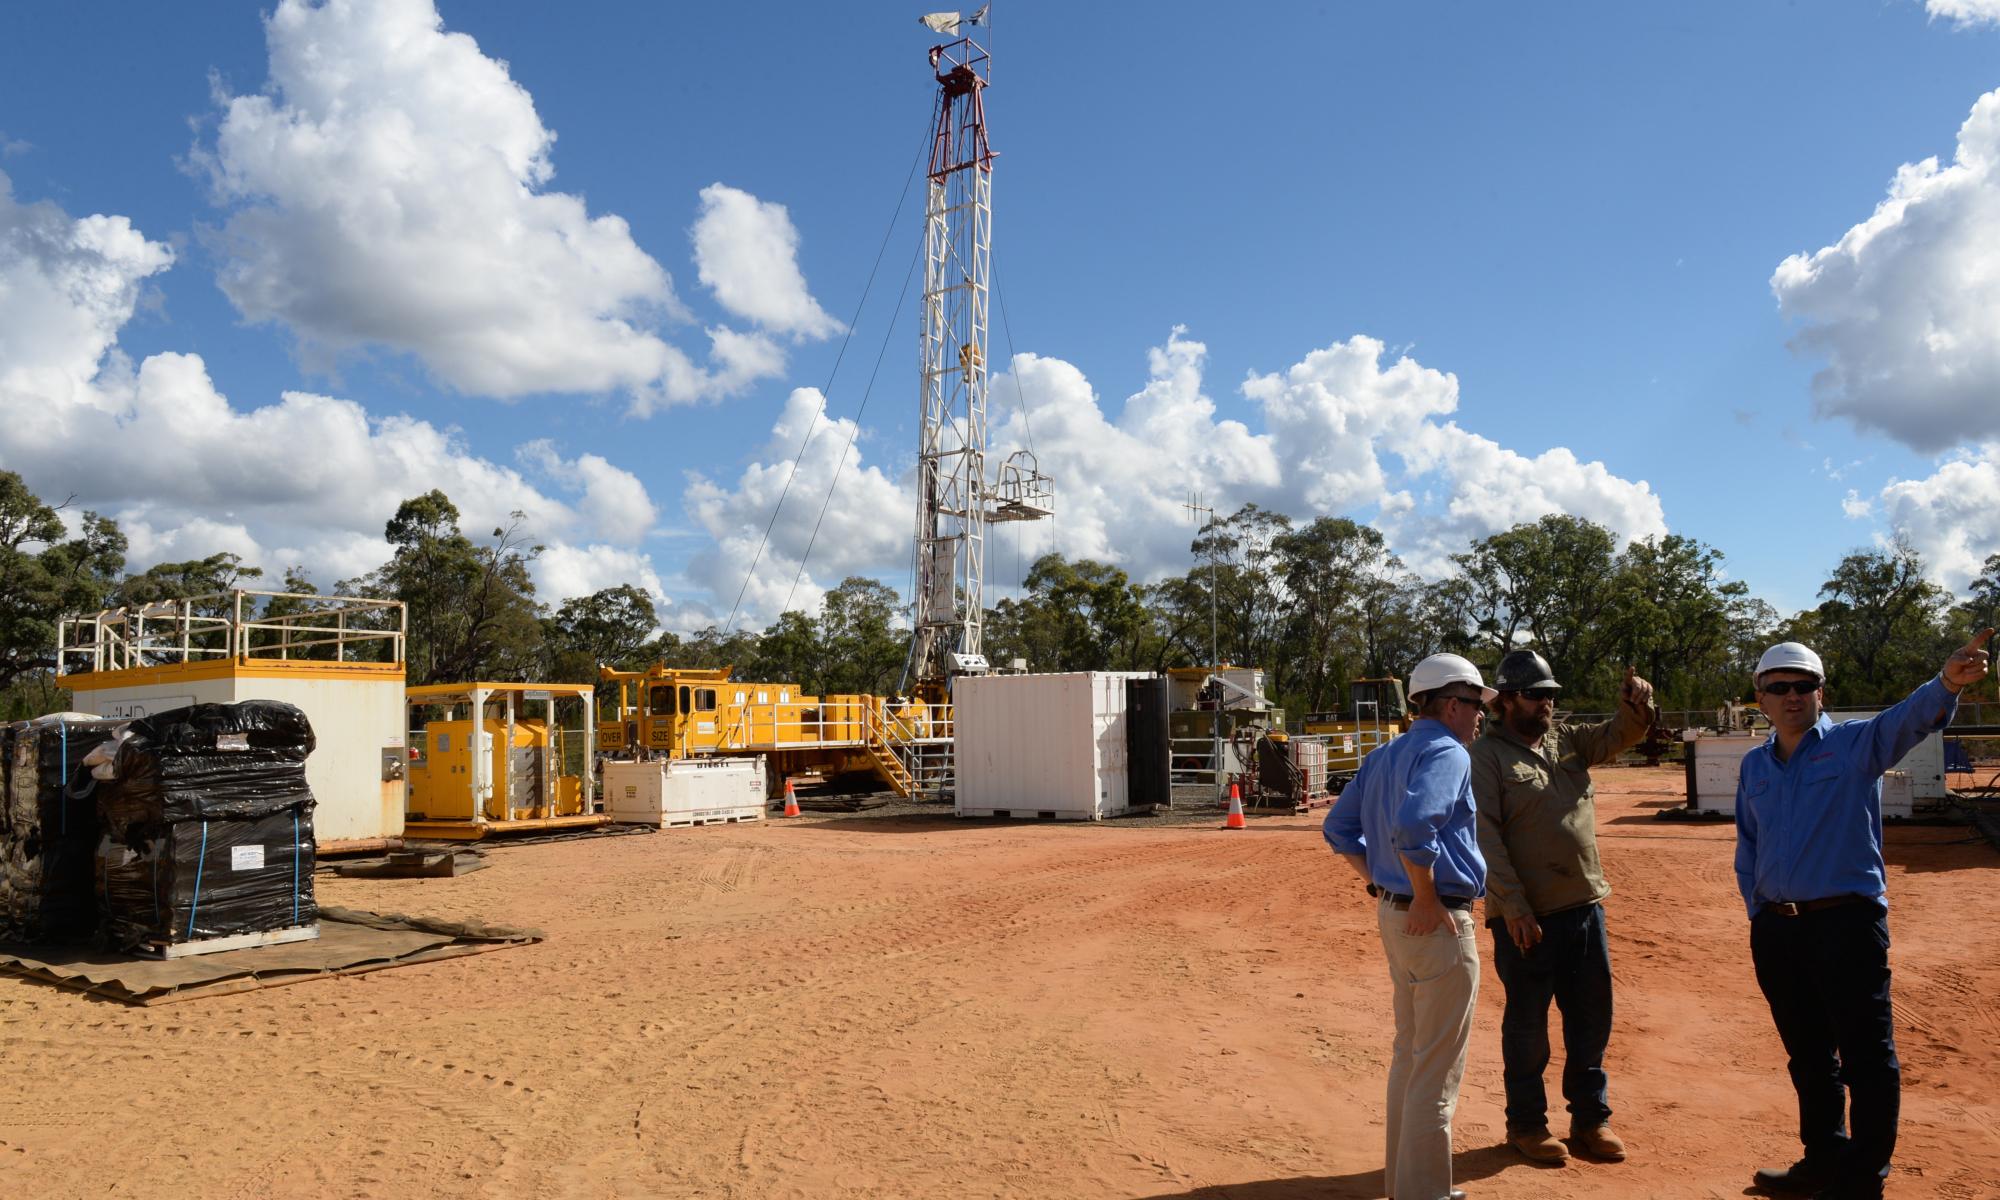 Narrabri gas project: do we need it and what's at stake for Australia's environment?